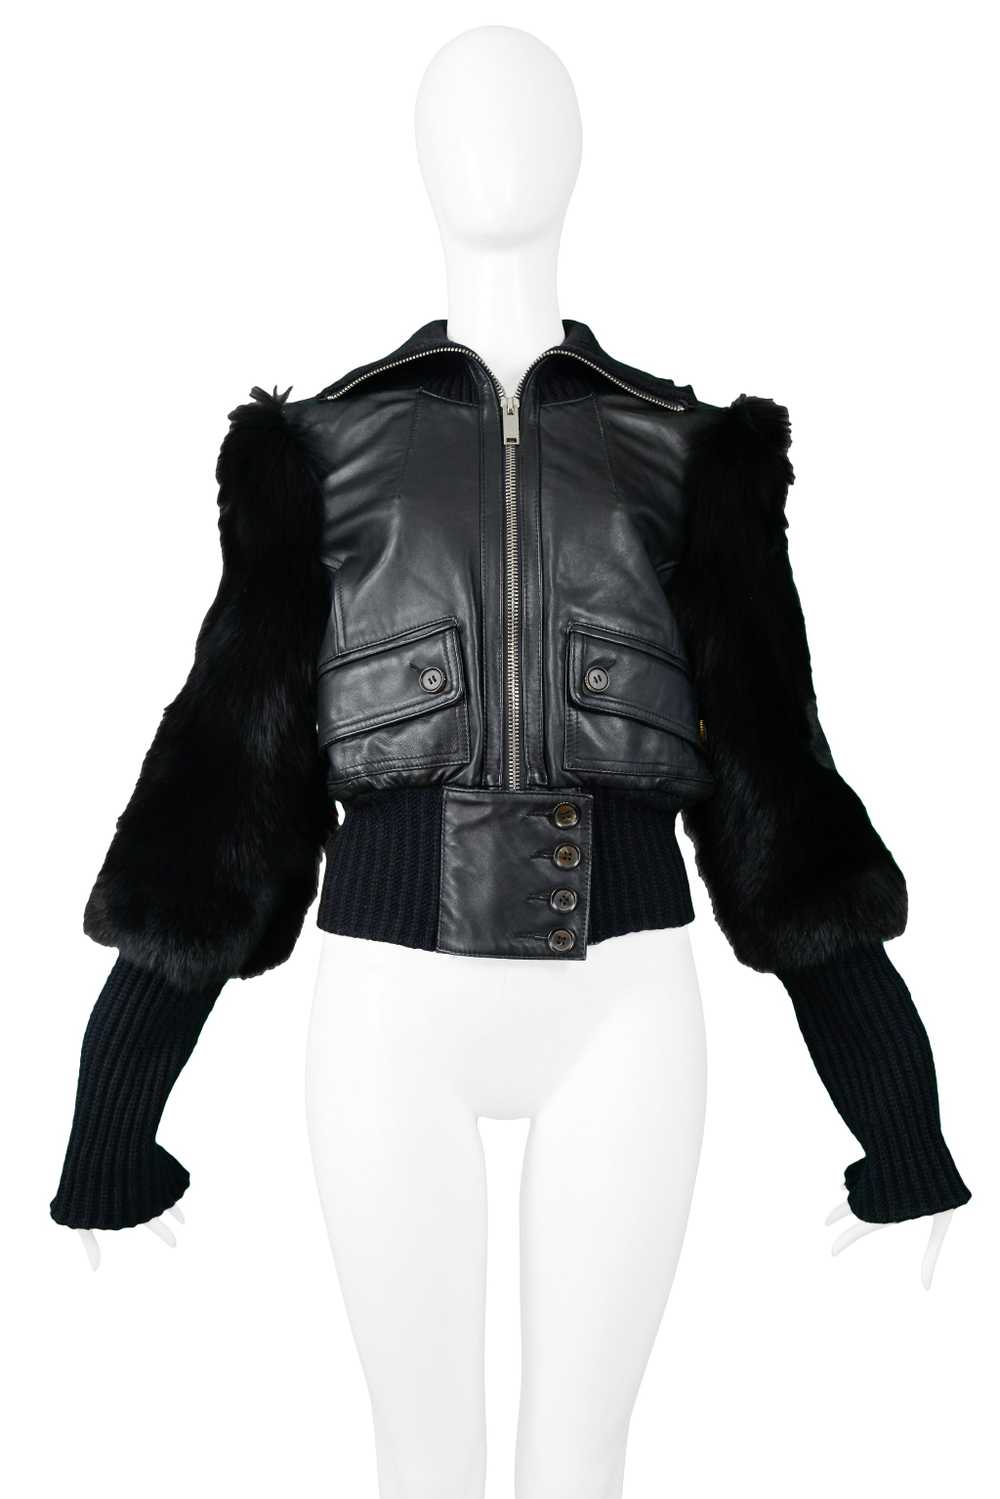 GUCCI BY TOM FORD LEATHER & FOX FUR JACKET 2003 - image 1